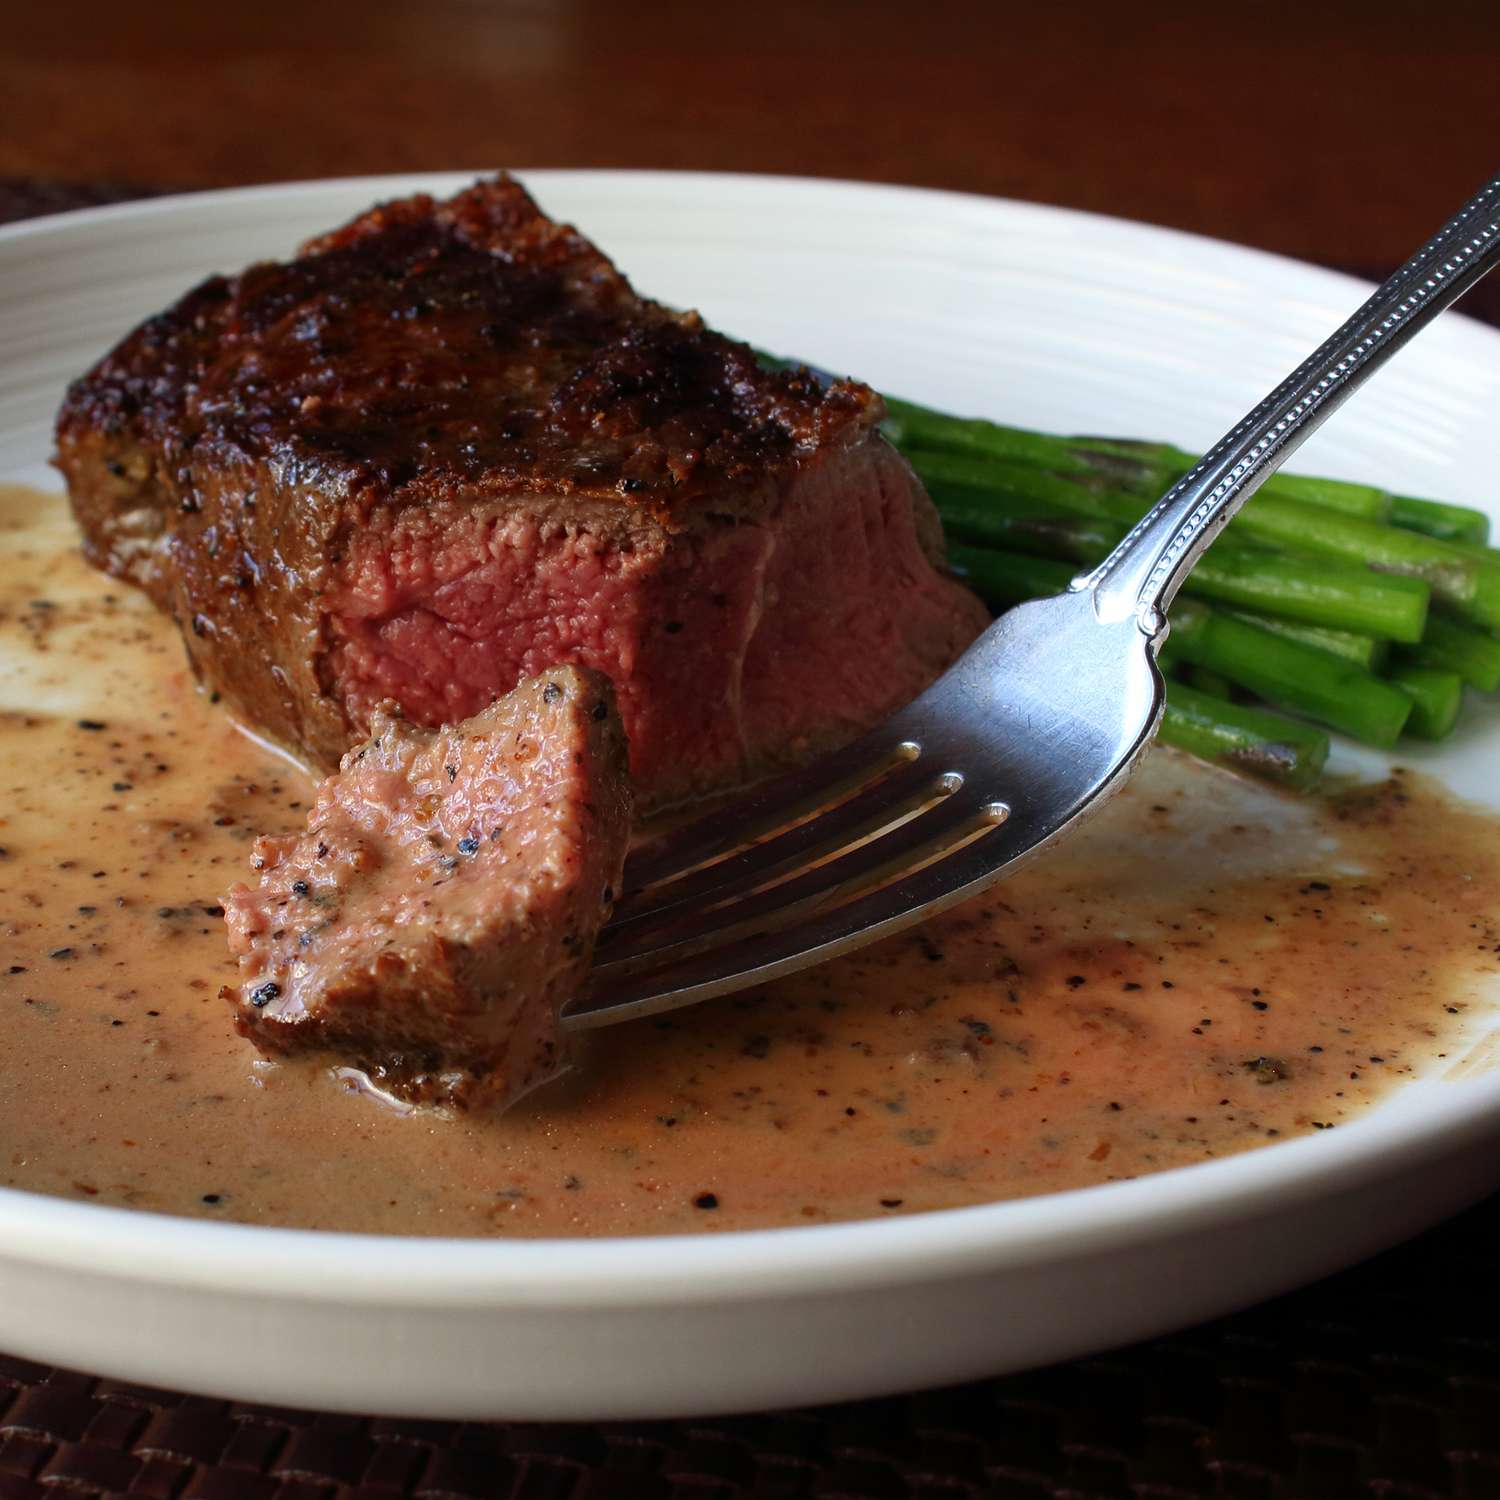 Close up view of a Bourbon Pepper Pan Sauce on a plate with a steak, asparagus, and a fork